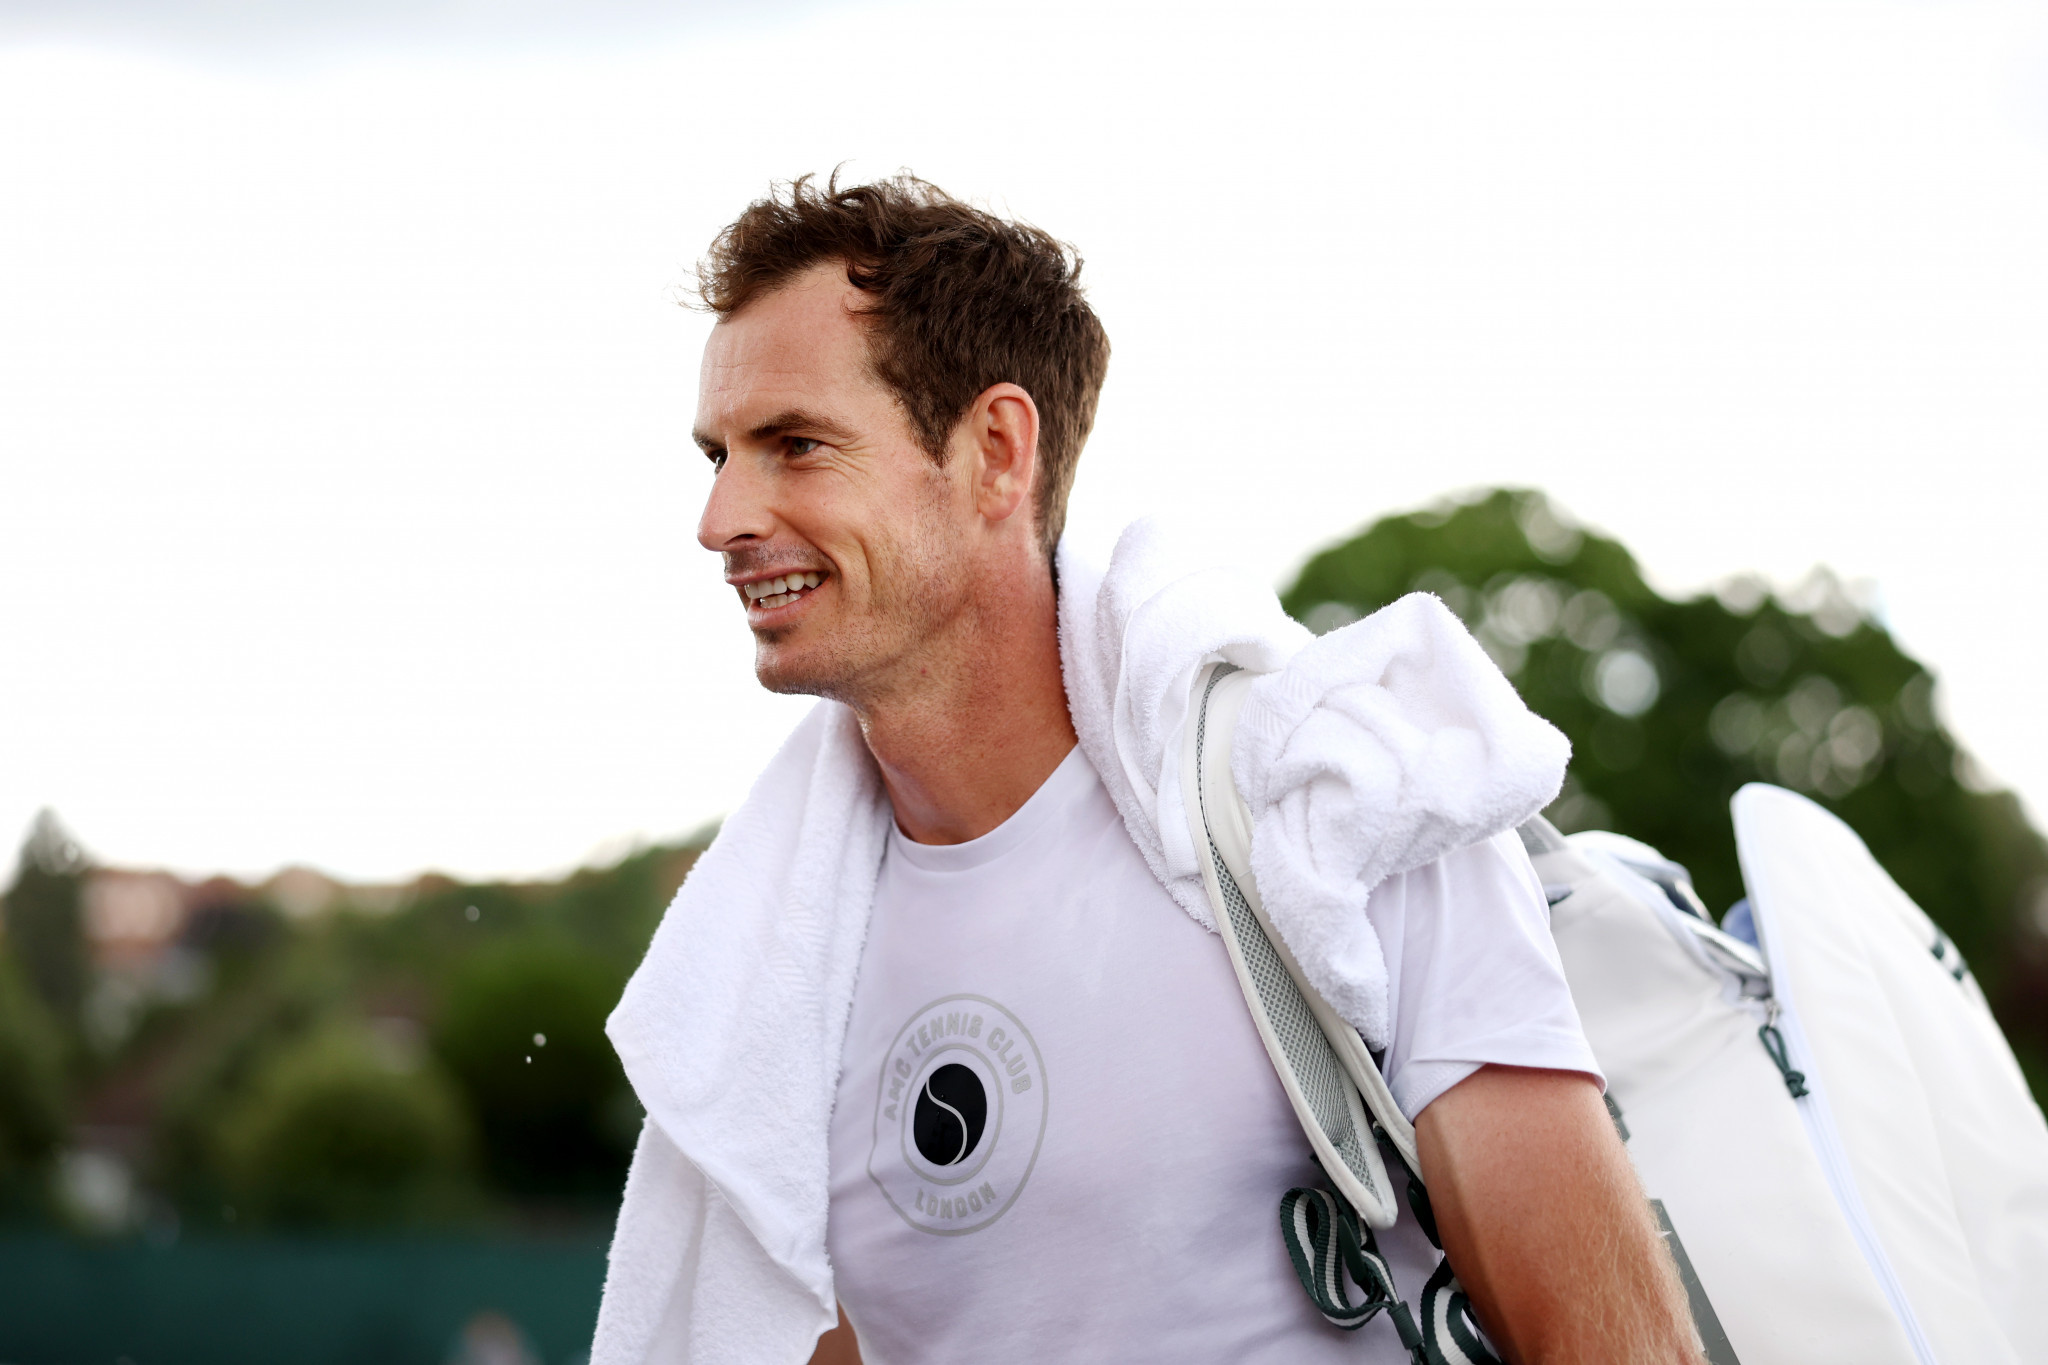 Sir Andy Murray joins sporting tributes to NHS on 75th anniversary